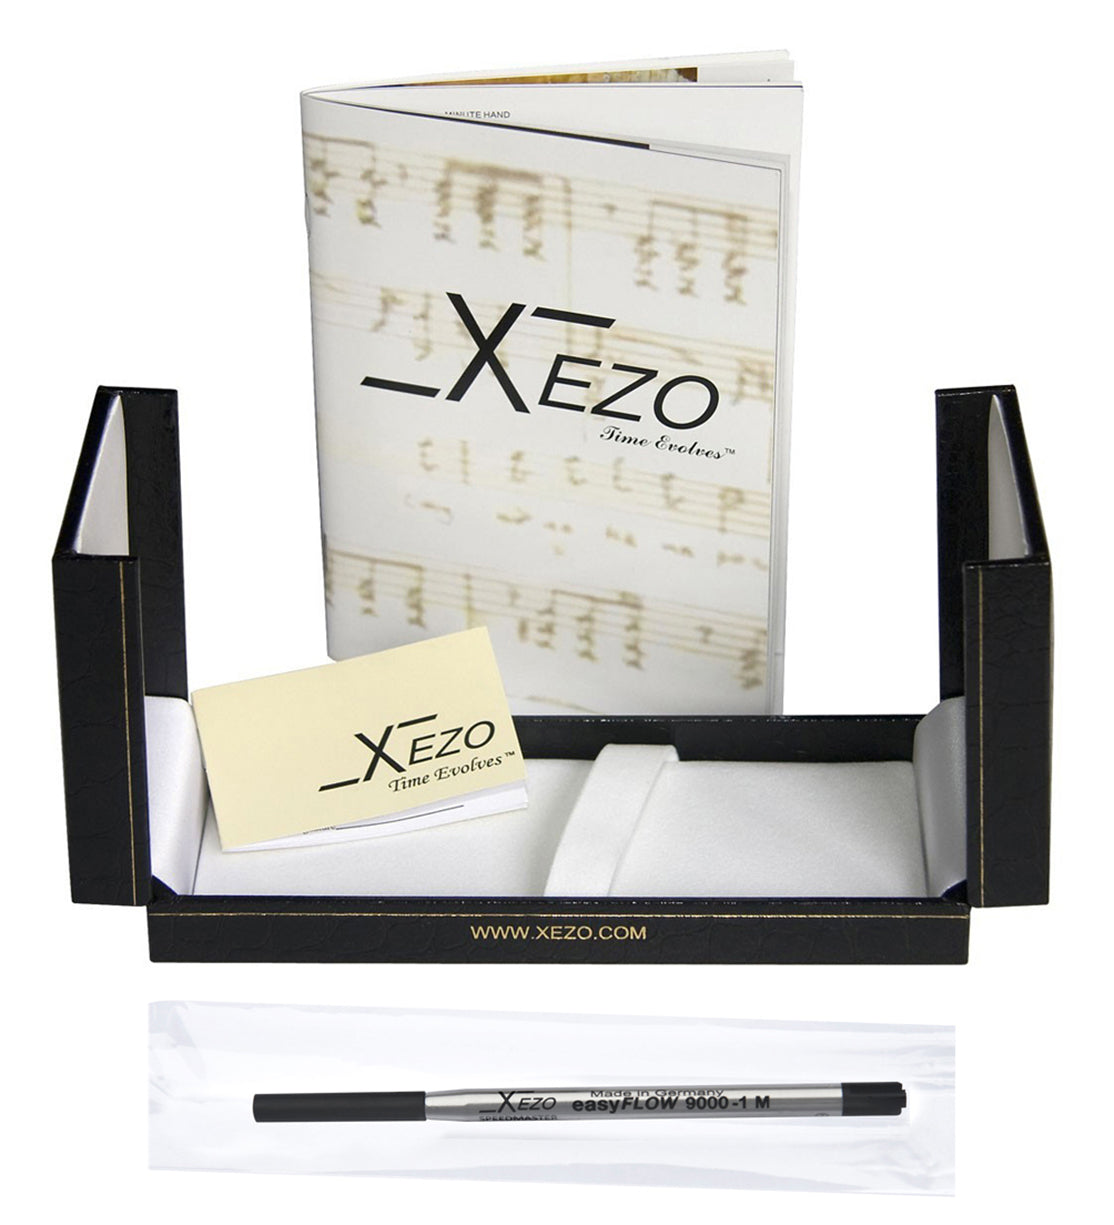 Xezo - Black gift box, certificate, manual, and ink cartridge of the Maestro 925 BL MOP BG ballpoint pen